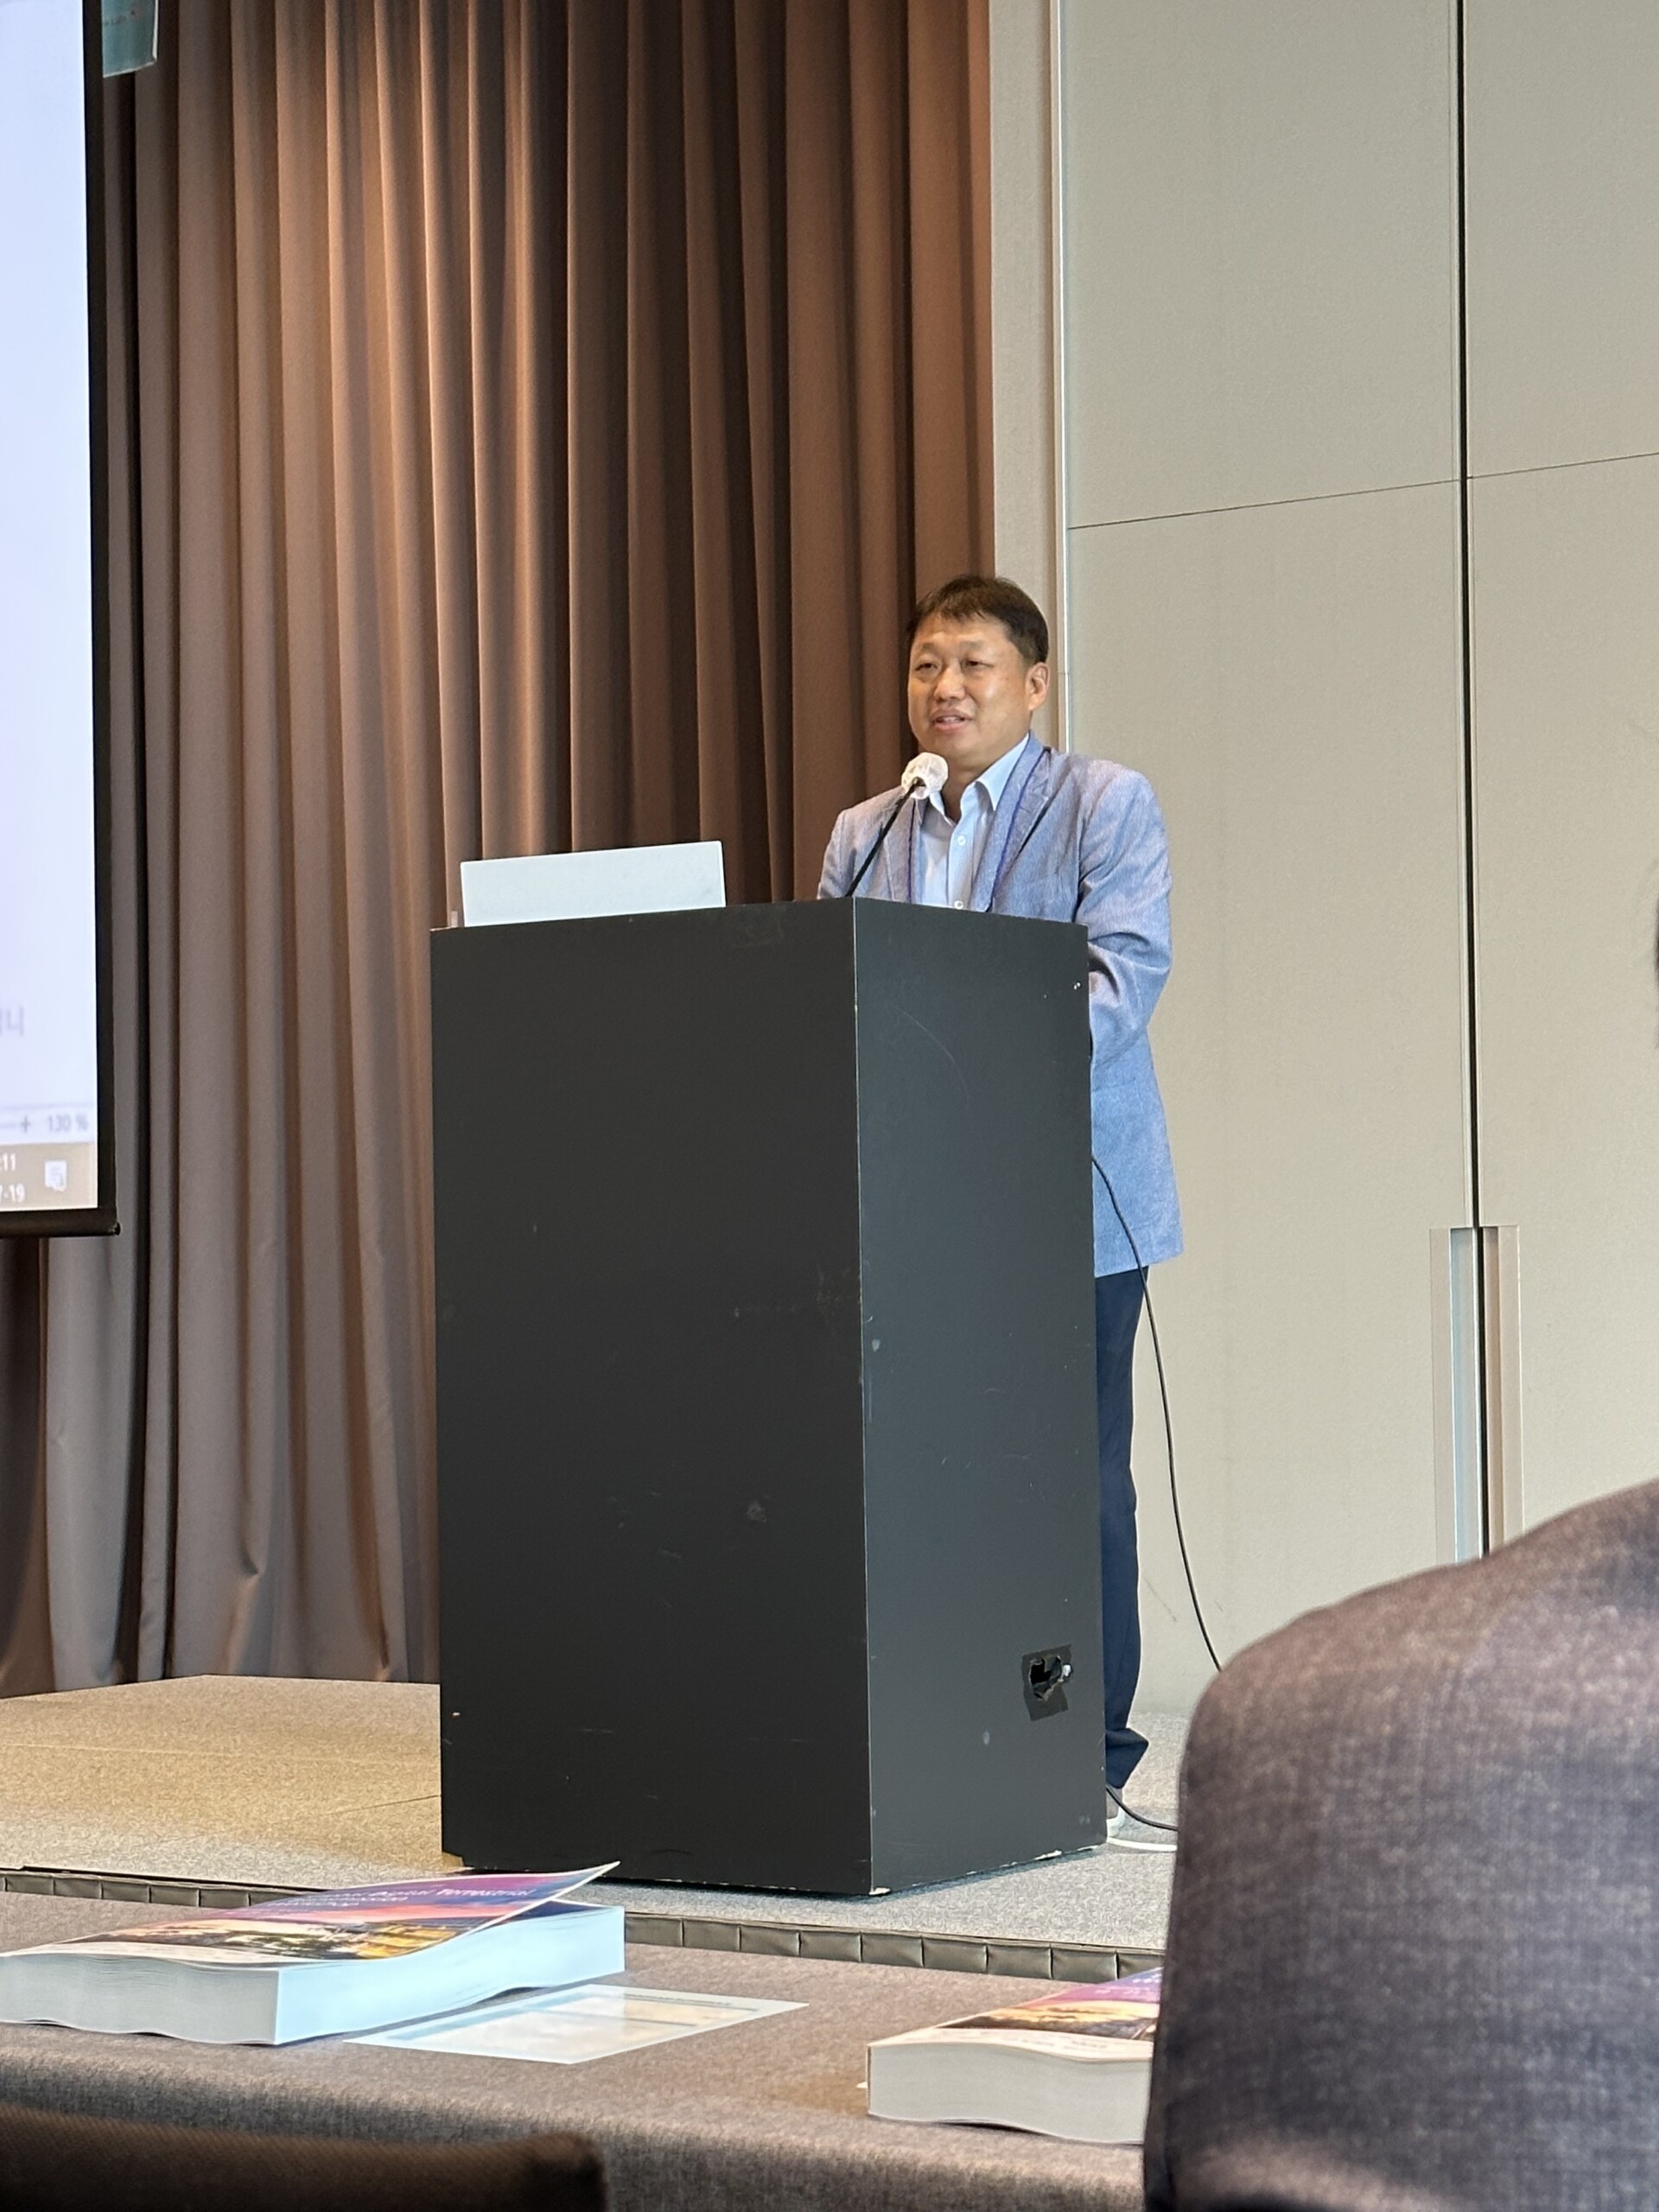 Jeong-Ik Lee, senior vice president and principal researcher at Korea’s Electronics and Telecommunications Research Institute, welcomes attendees and participants.